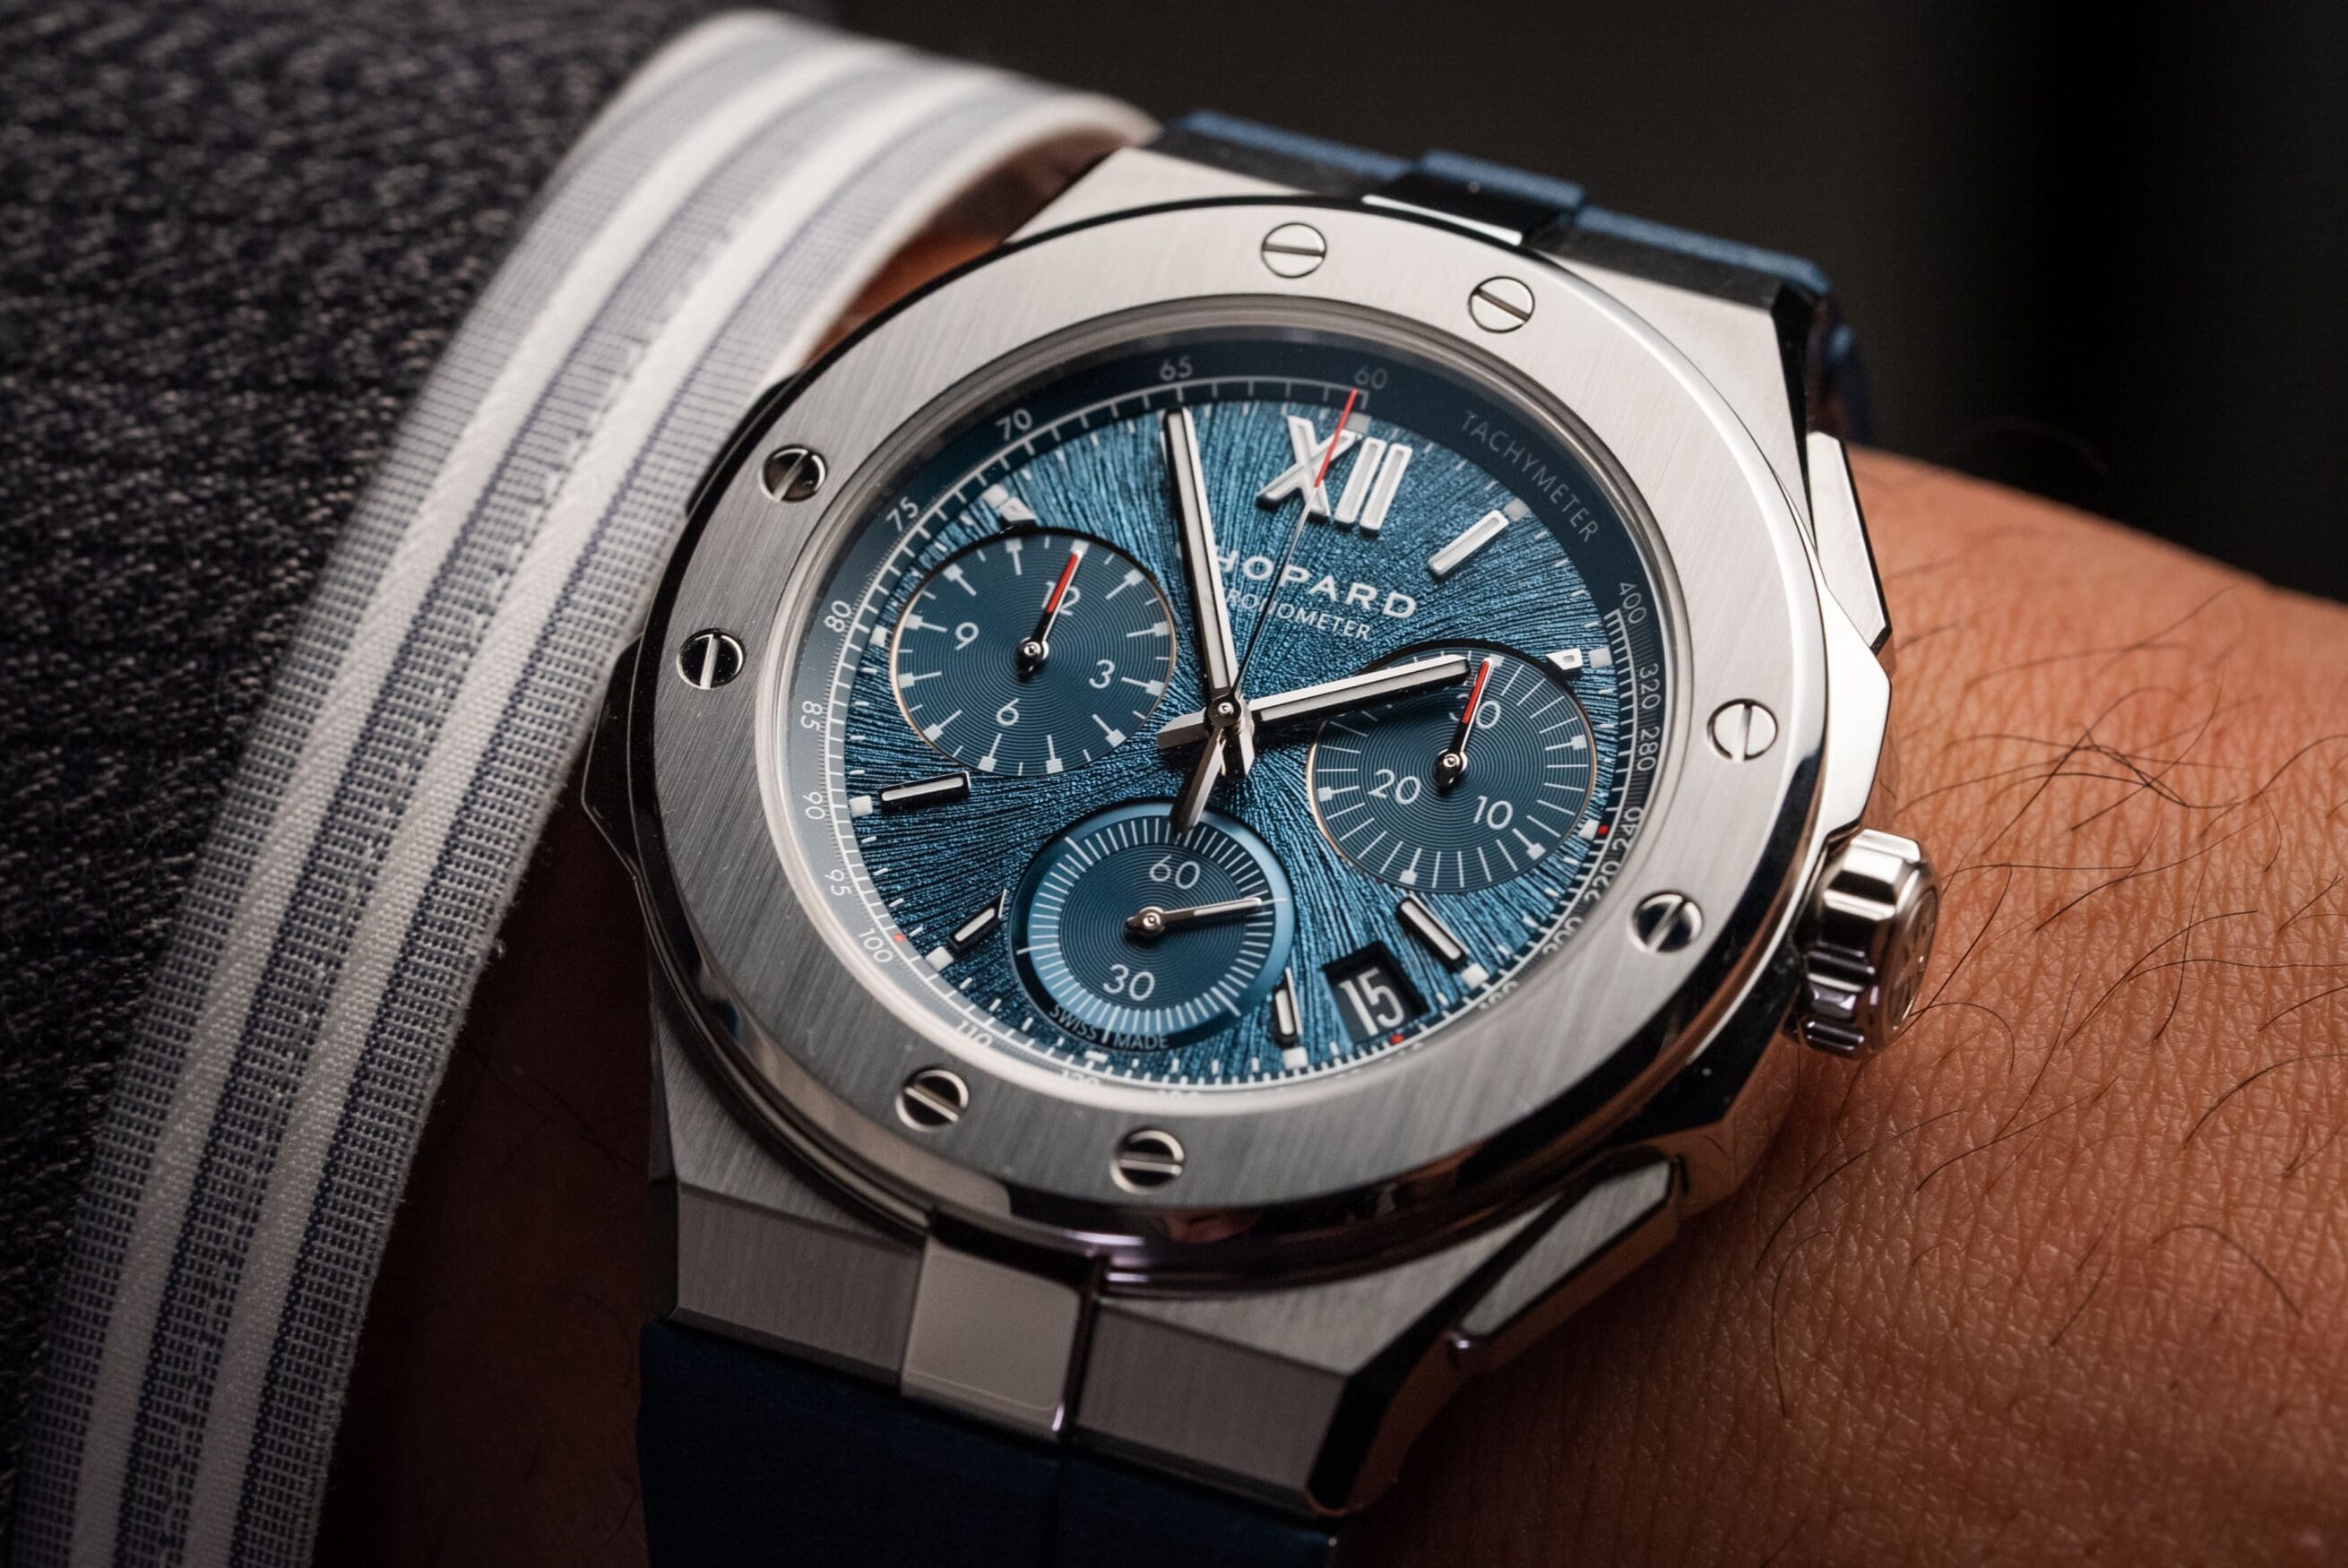 The Chopard Alpine Eagle Chrono is more eye-catching than ever on an integrated rubber strap